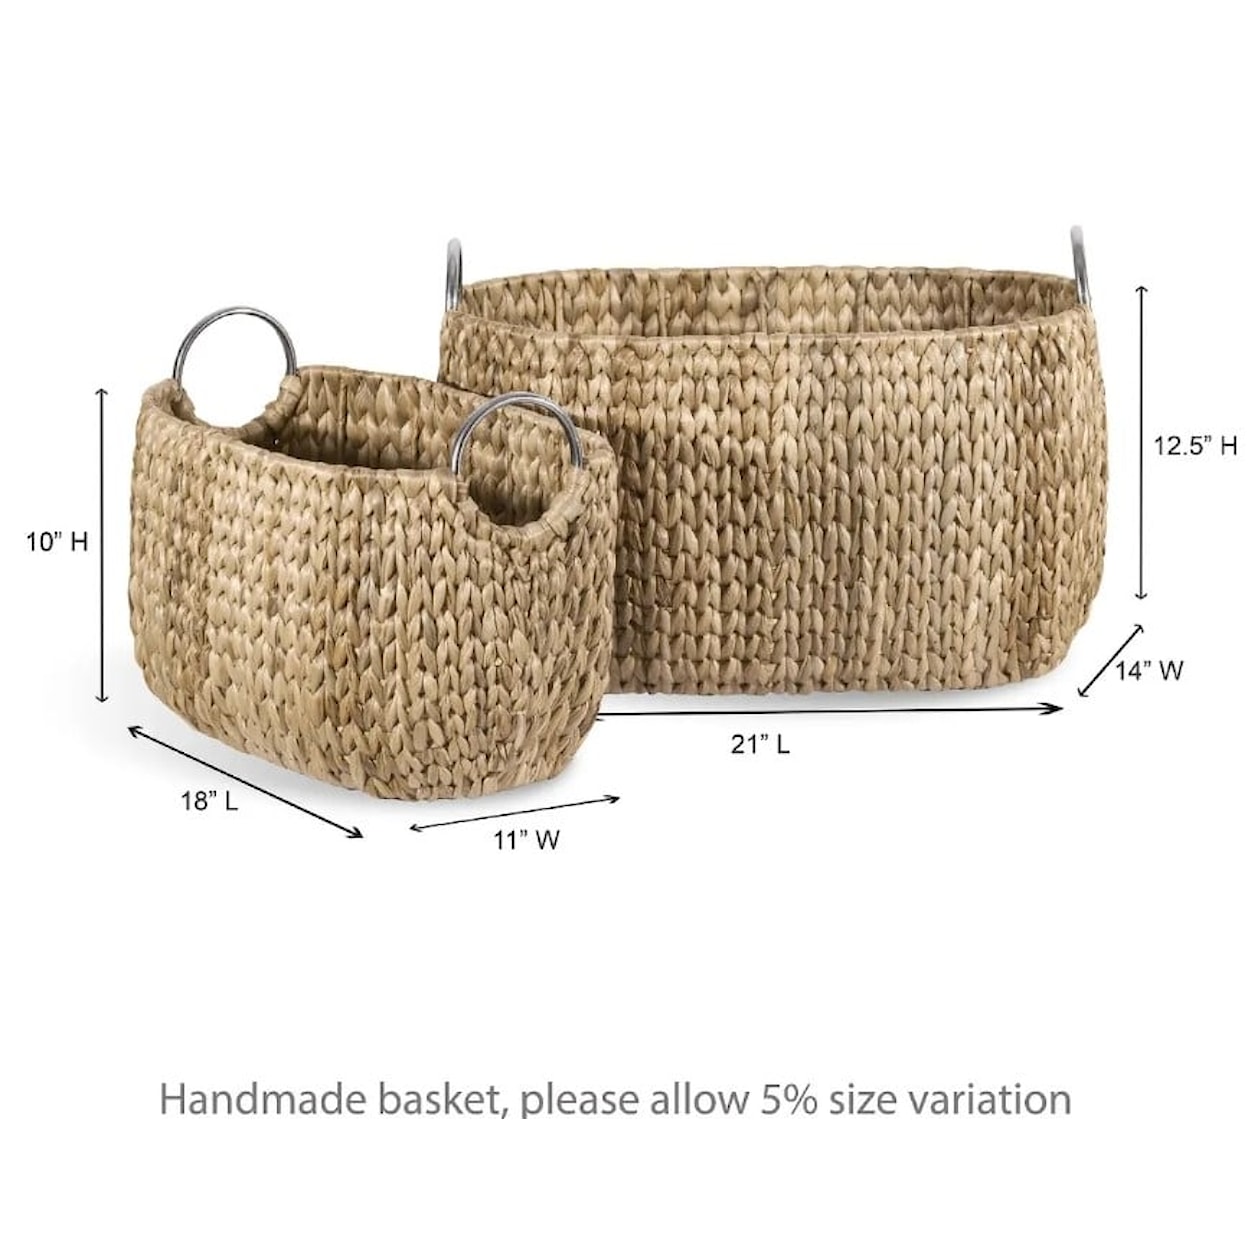 Ibolili Baskets and Sets WOVEN WATER HYACINTH BSKT W/ STAINLESS RINGS